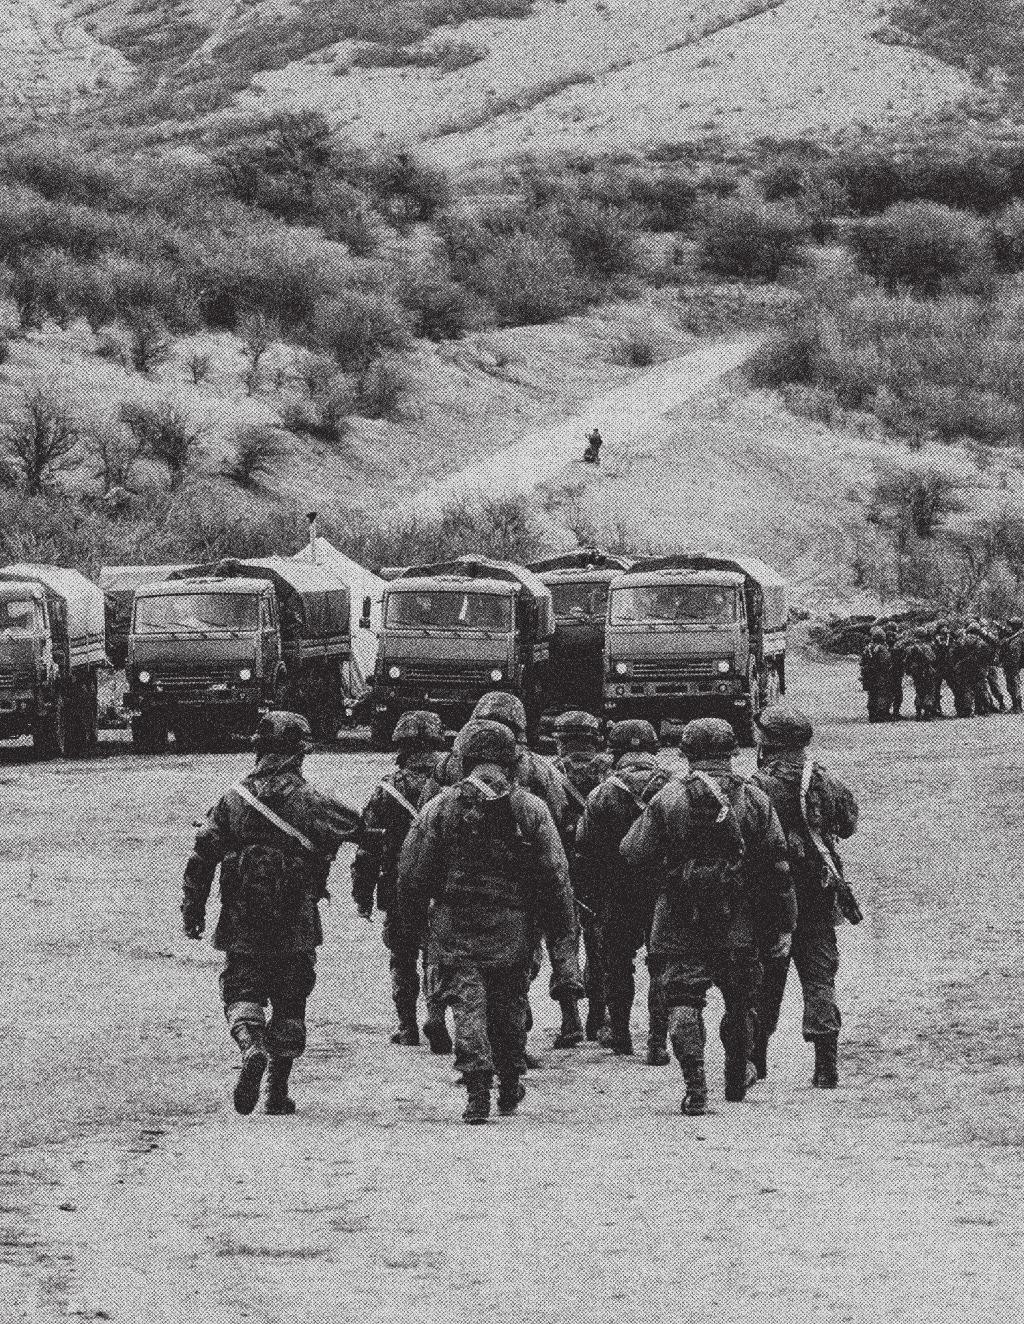 Russian soldiers marching on 5